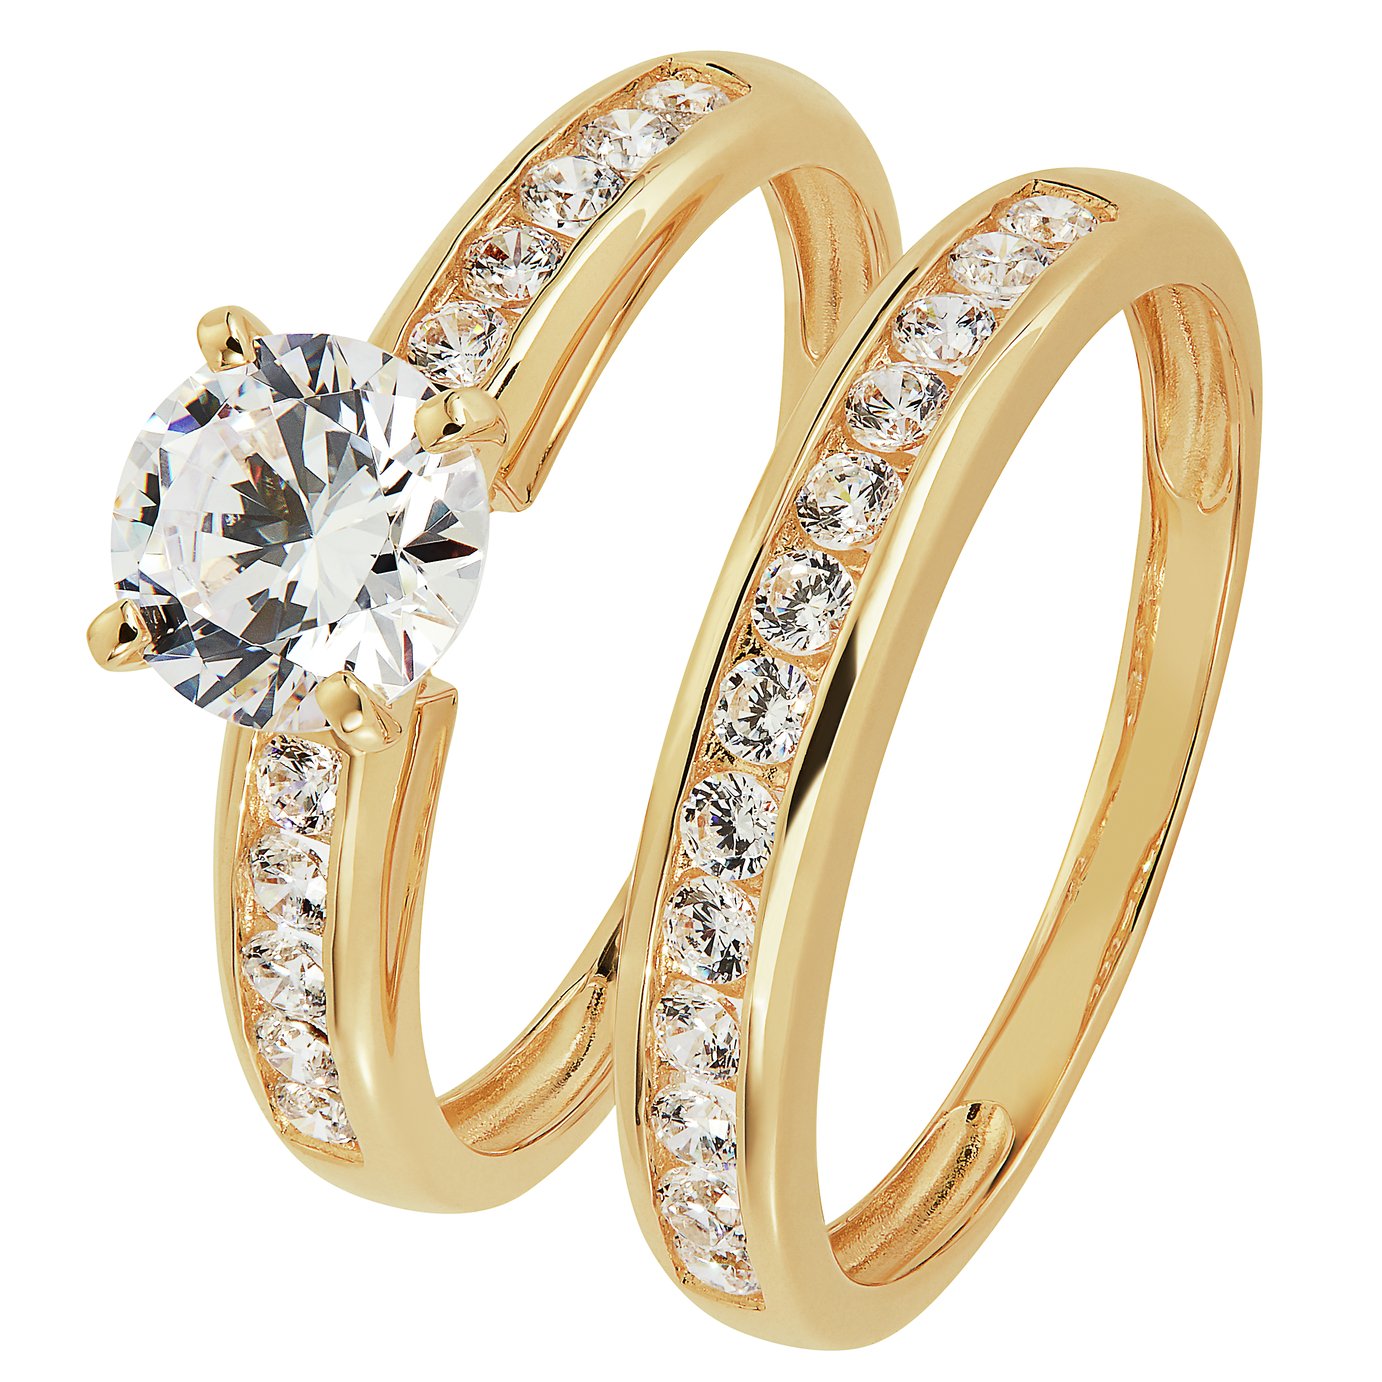 Revere 9ct Gold Cubic Zirconia Solitaire Engagement Ring - V